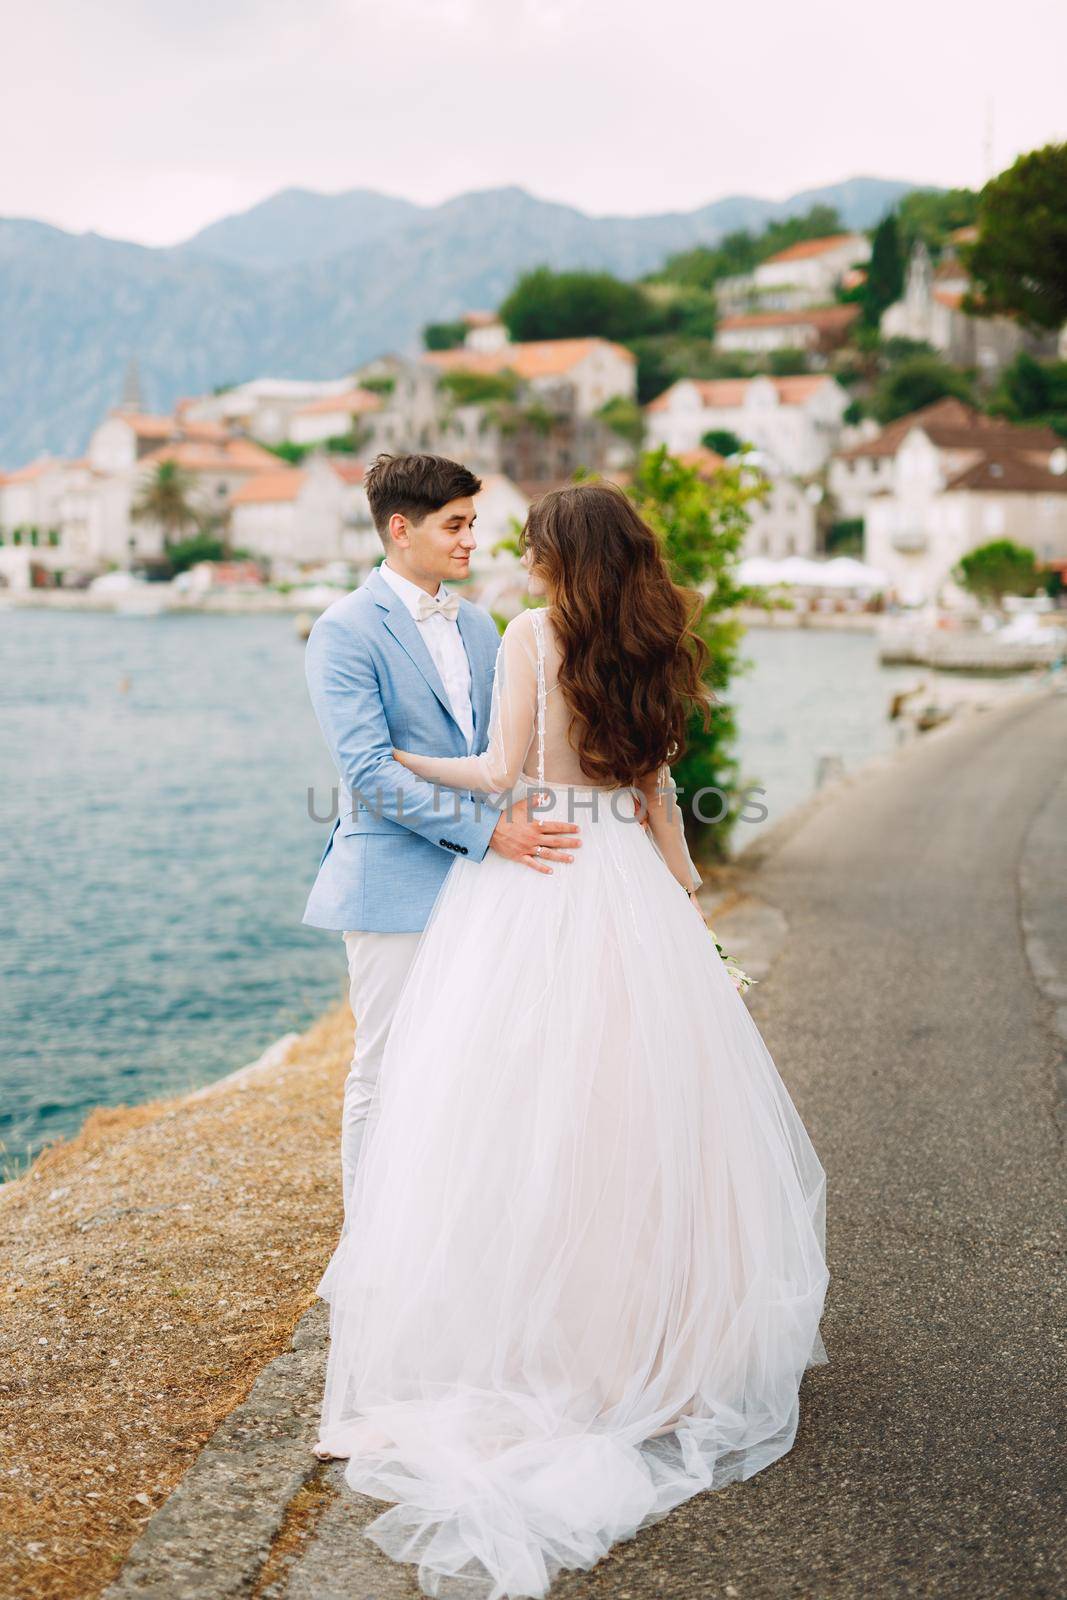 The bride and groom tenderly embrace on the seashore near the cozy old town of Perast in the Bay of Kotor by Nadtochiy